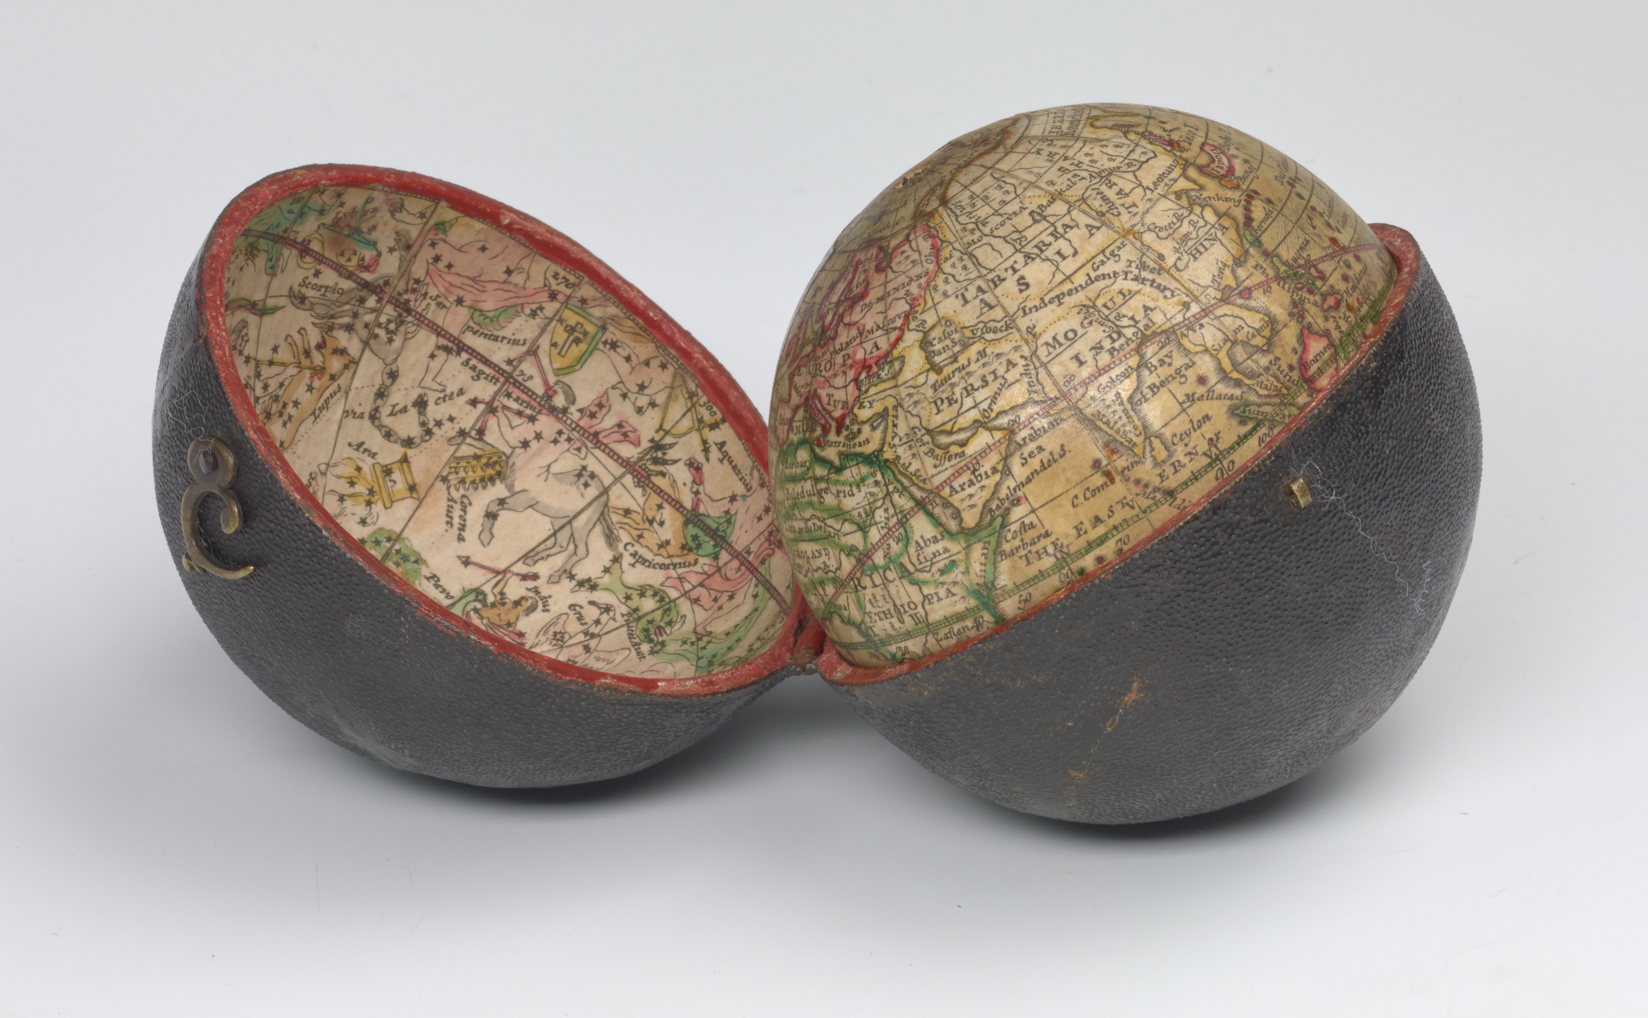 A correct globe with the new discoveries, ca 1775